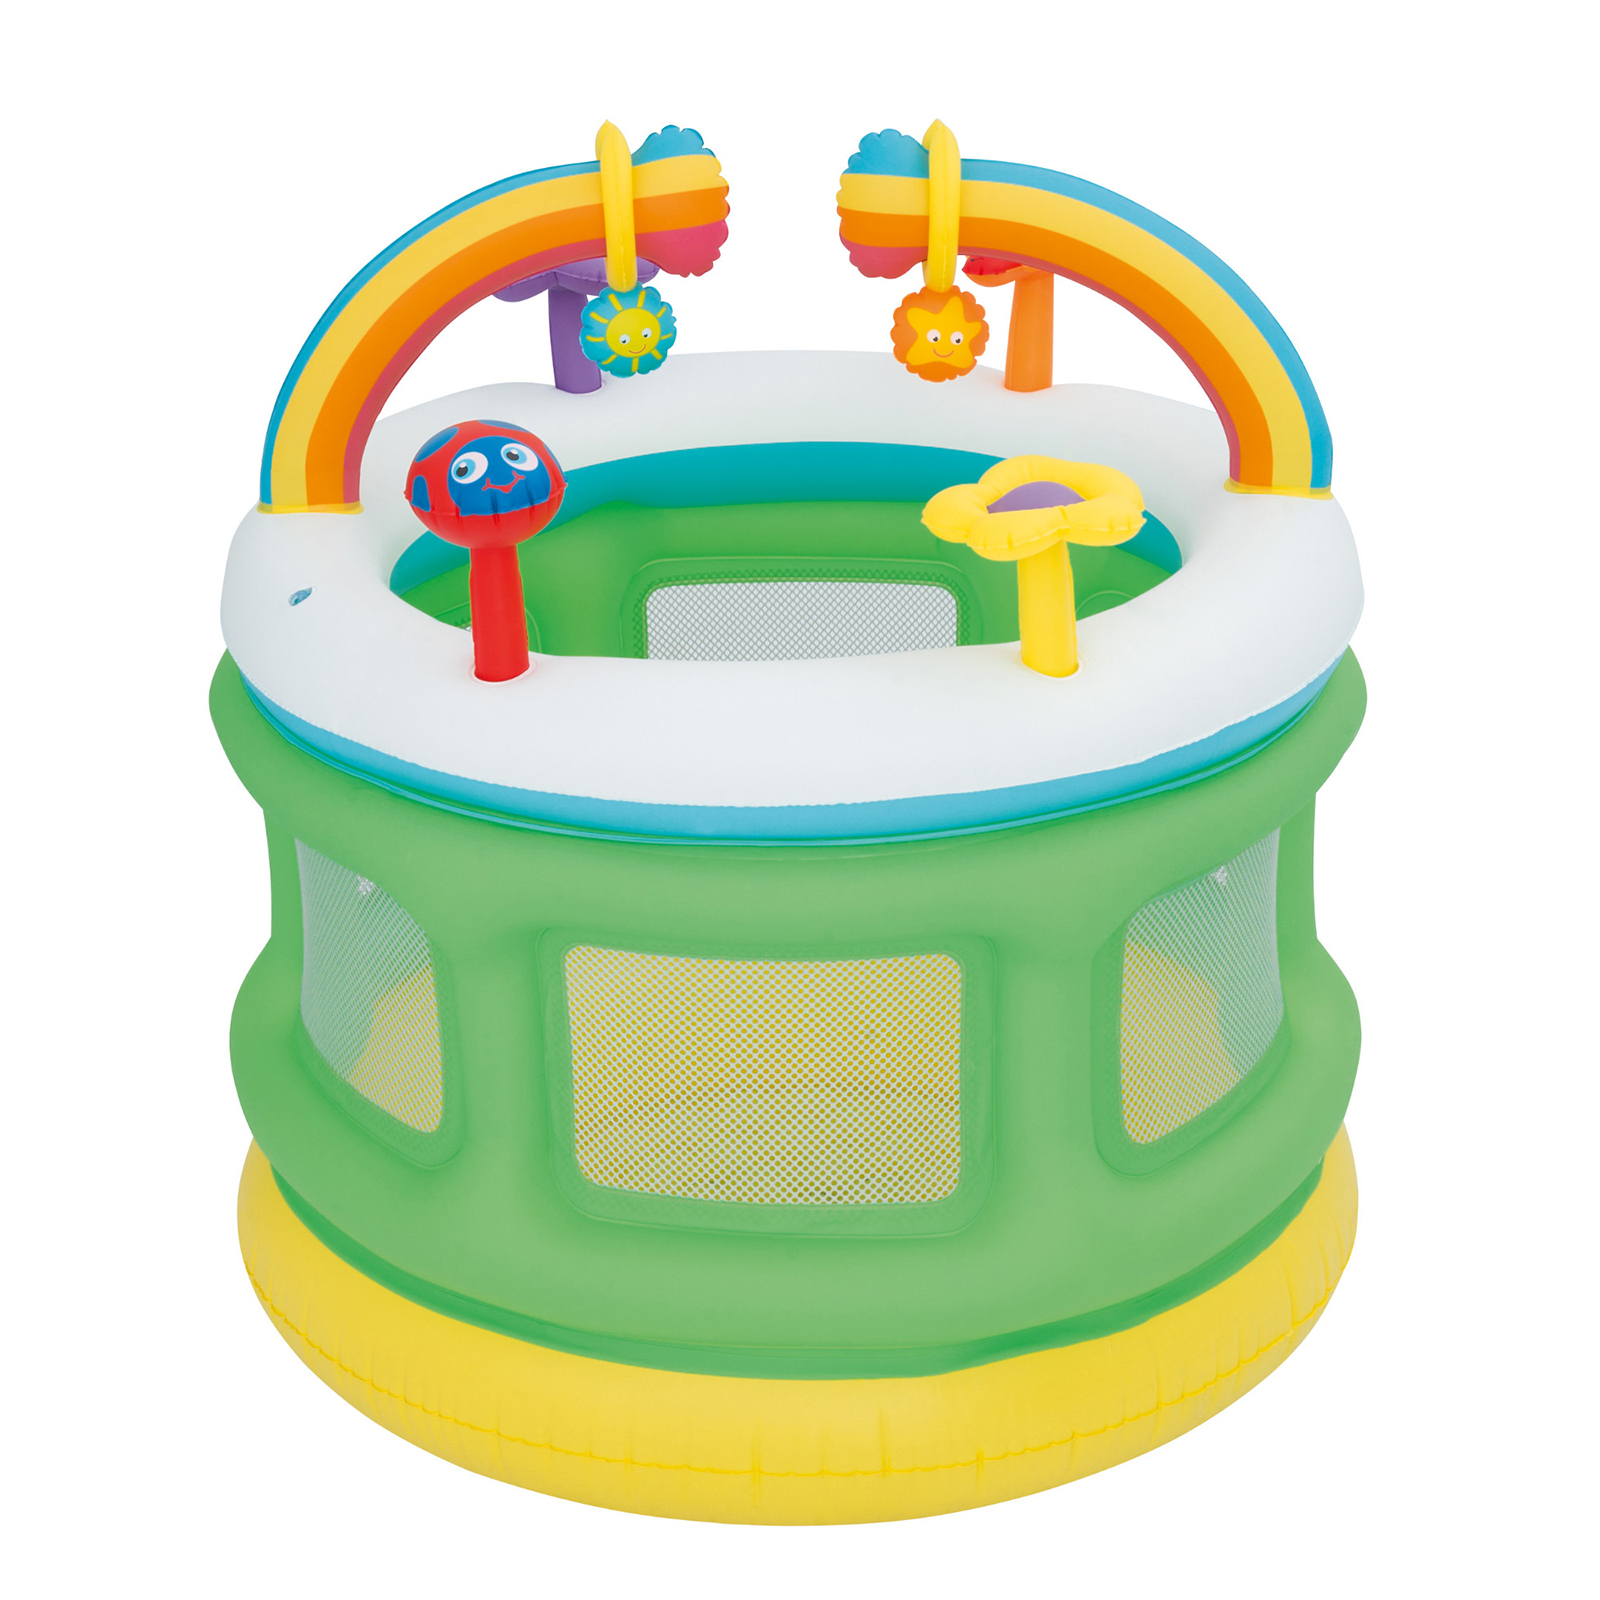 UPC 821808522217 product image for Bestway Up In and Over Rainbow Go and Grow Play Center | upcitemdb.com